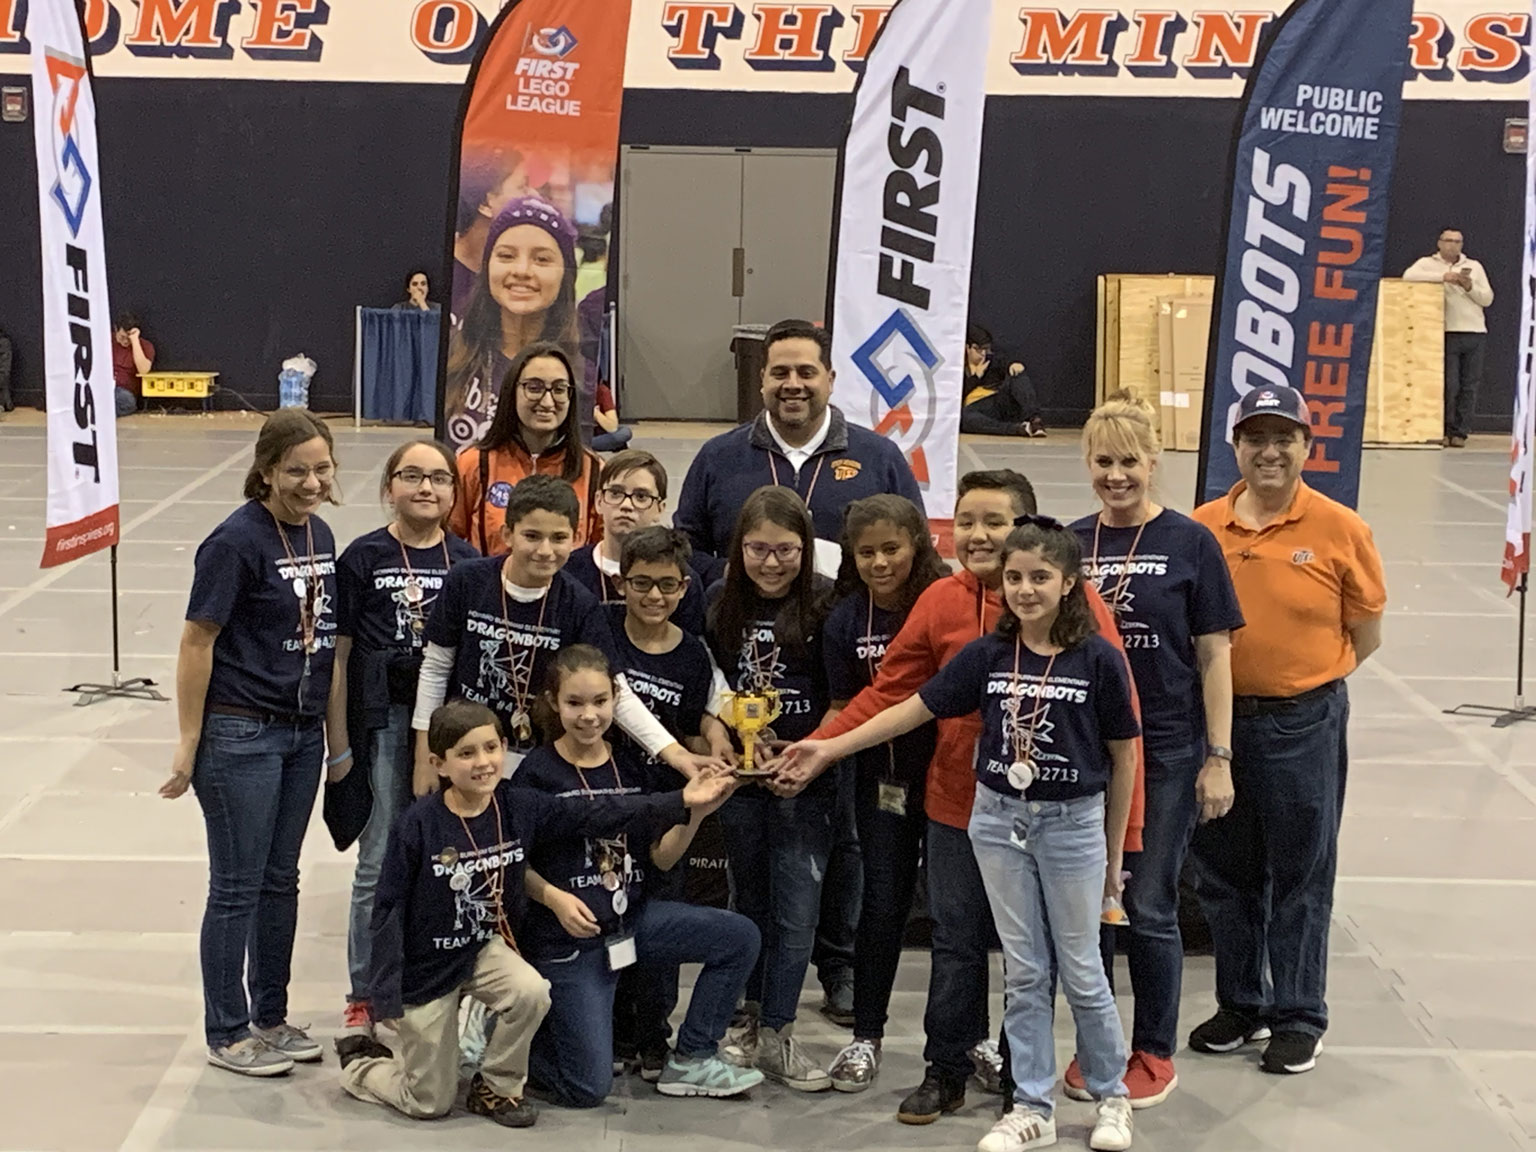 The Dragonbots team hold up their trophy. Representatives from UTEP are also present in the background.